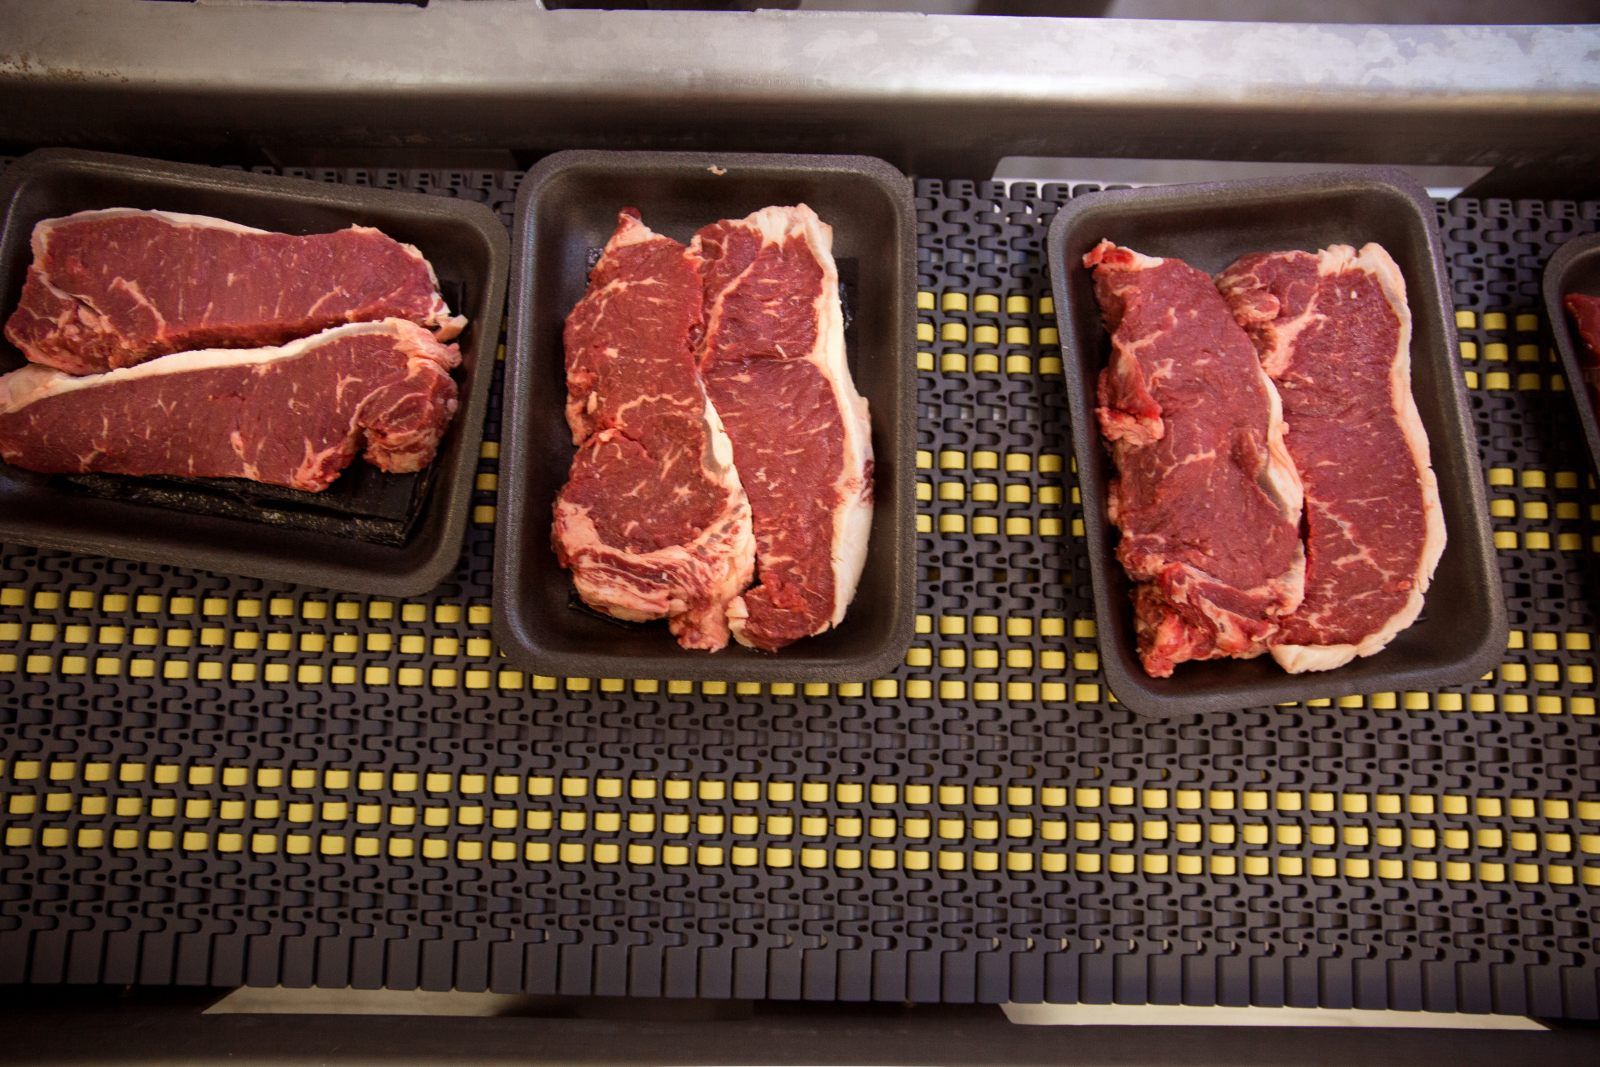 Cuts of beef sit on black styrofoam trays on a conveyor belt at a meat processing plant - beef prices